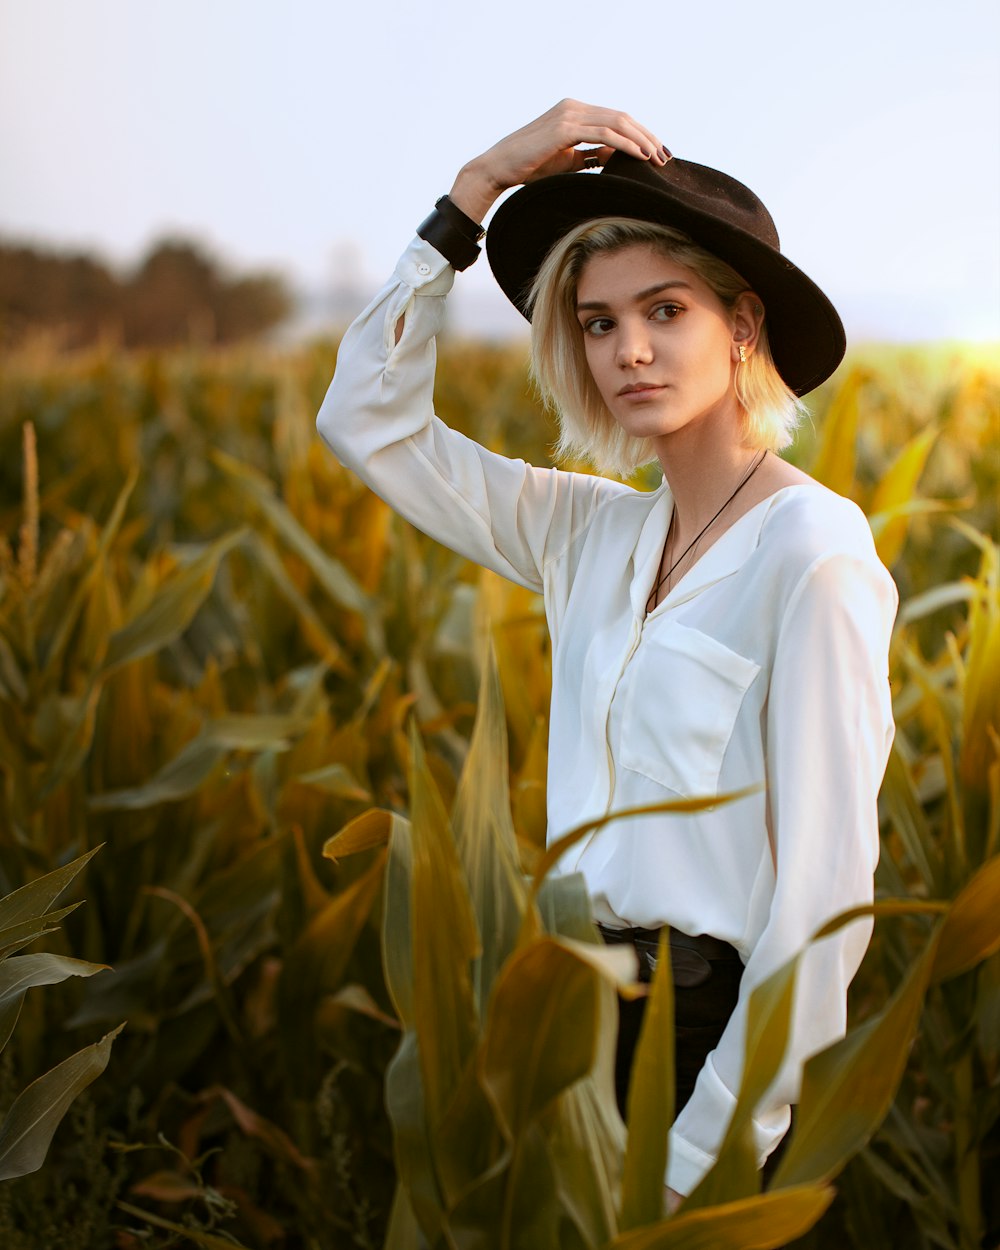 woman in white long sleeve shirt wearing black hat standing on corn field during daytime